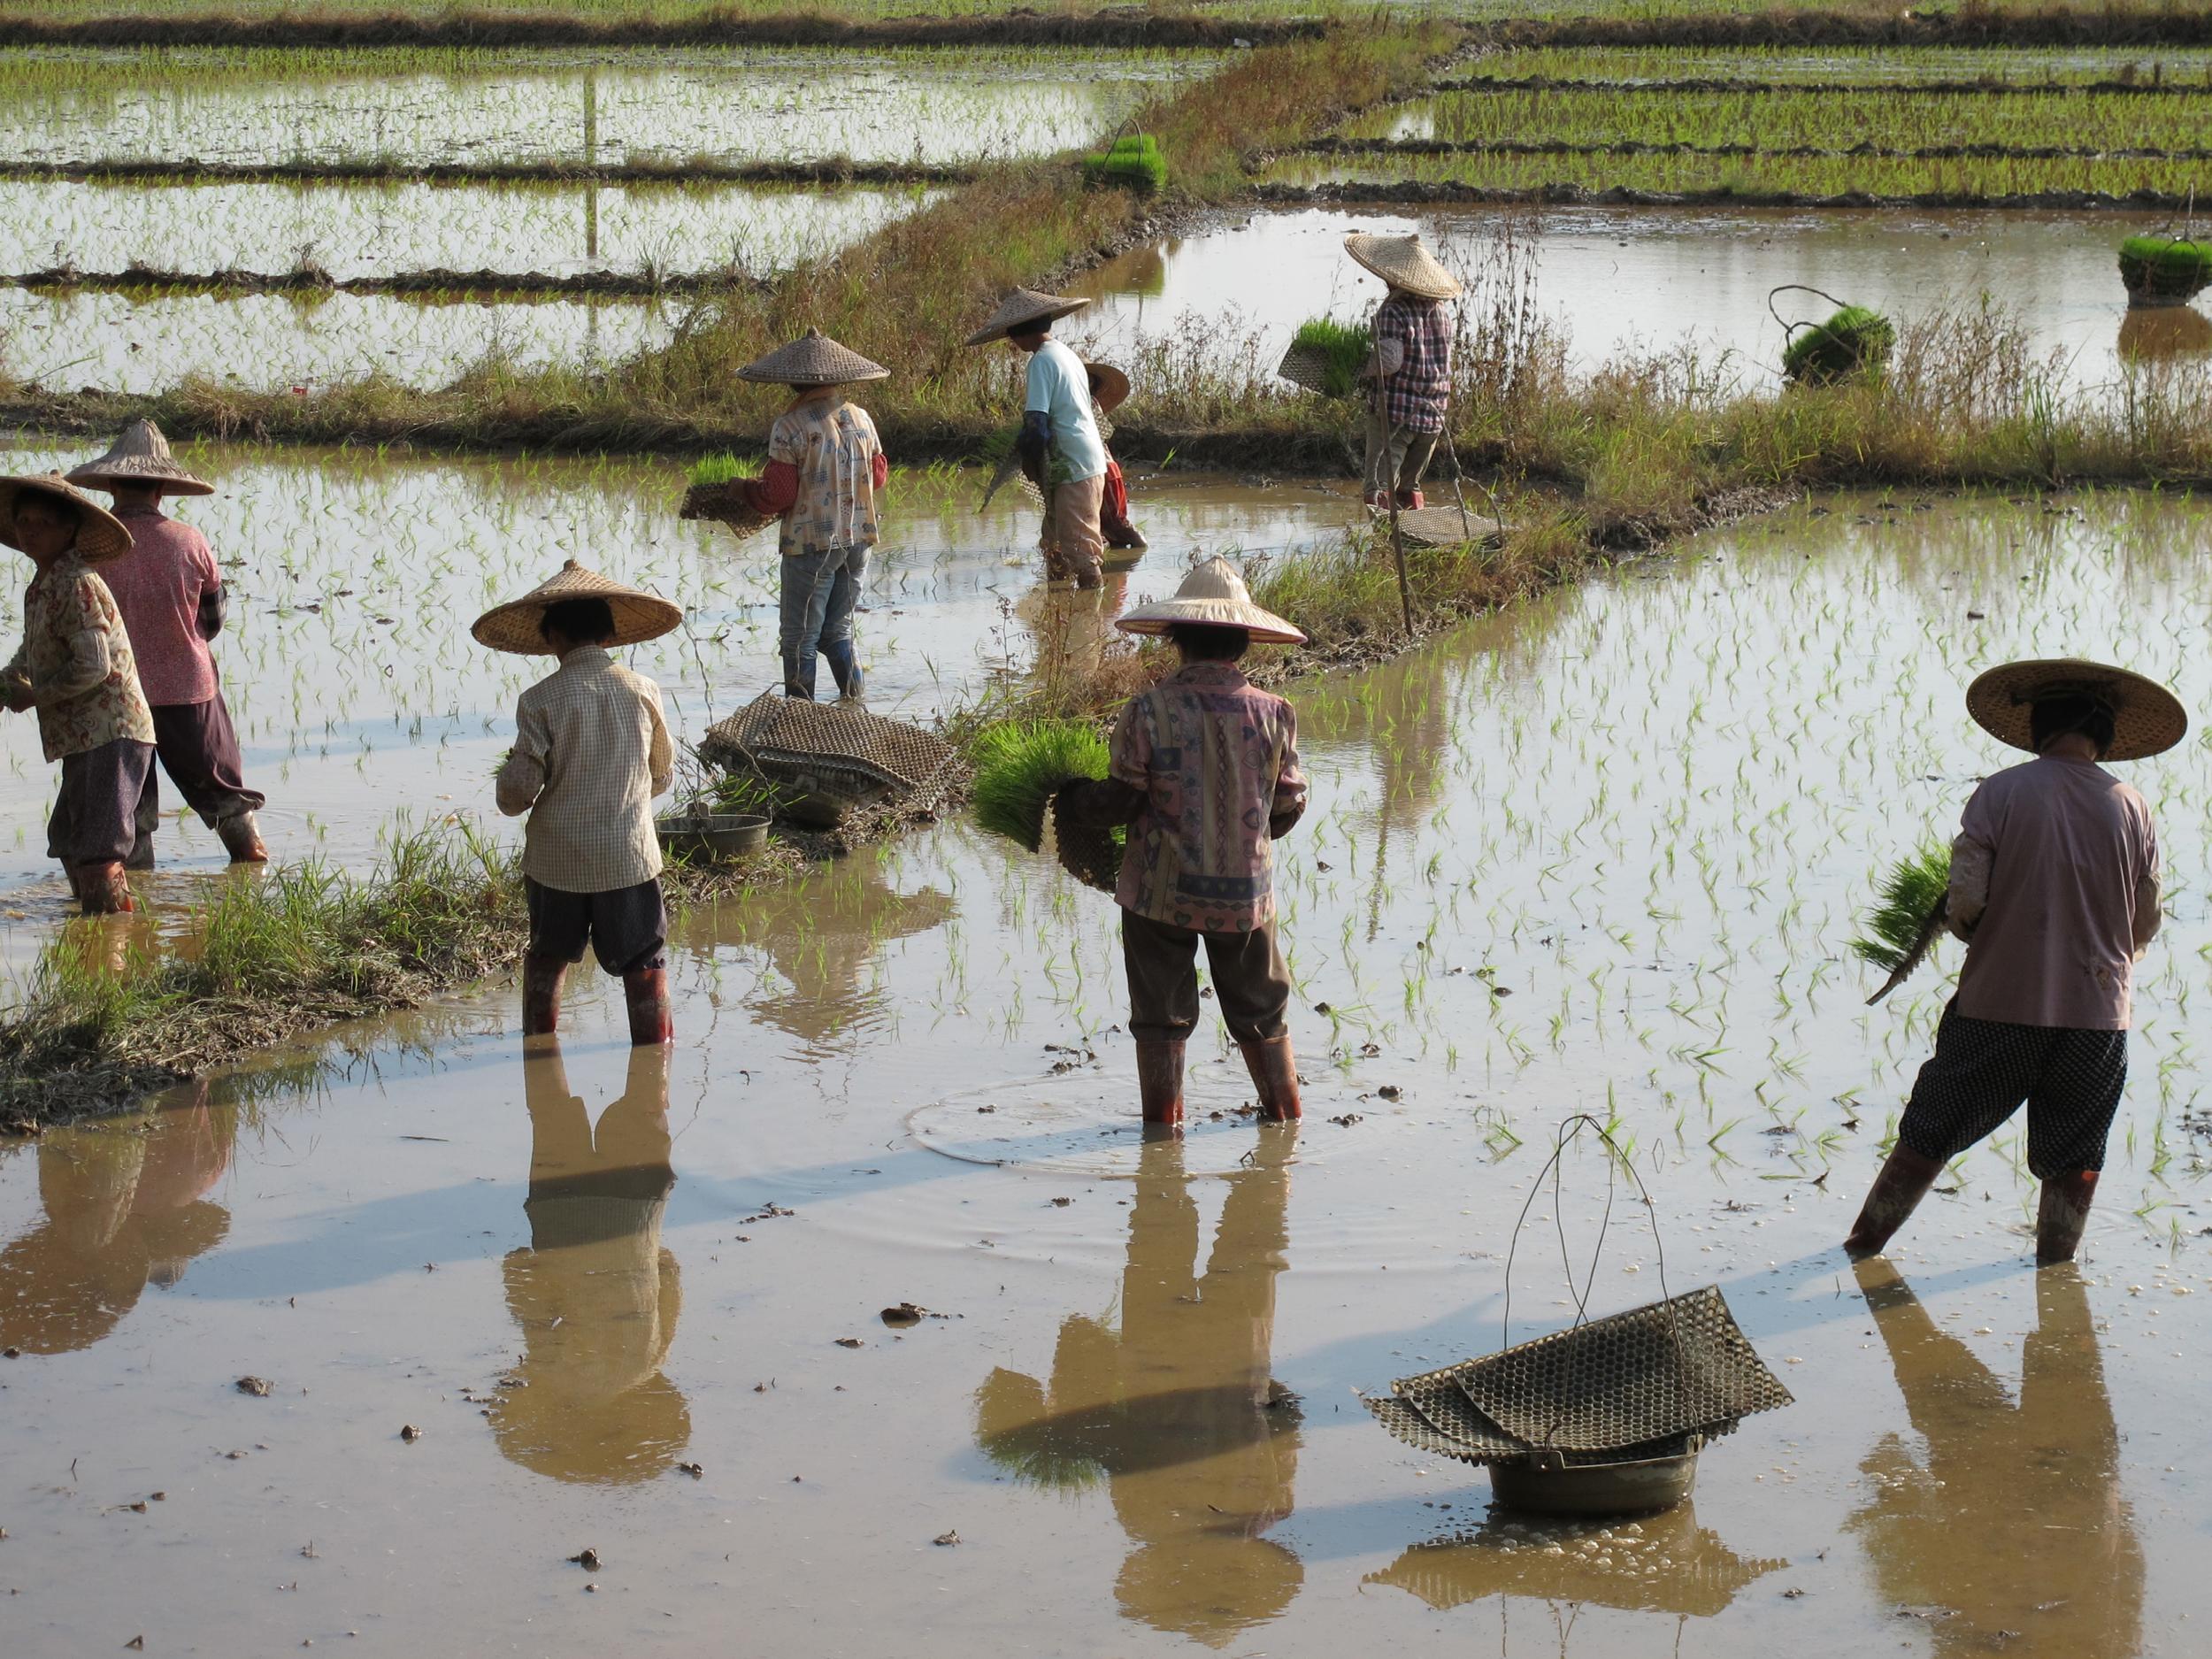 Farmers transplant rice seedlings in Guangdong Province, China